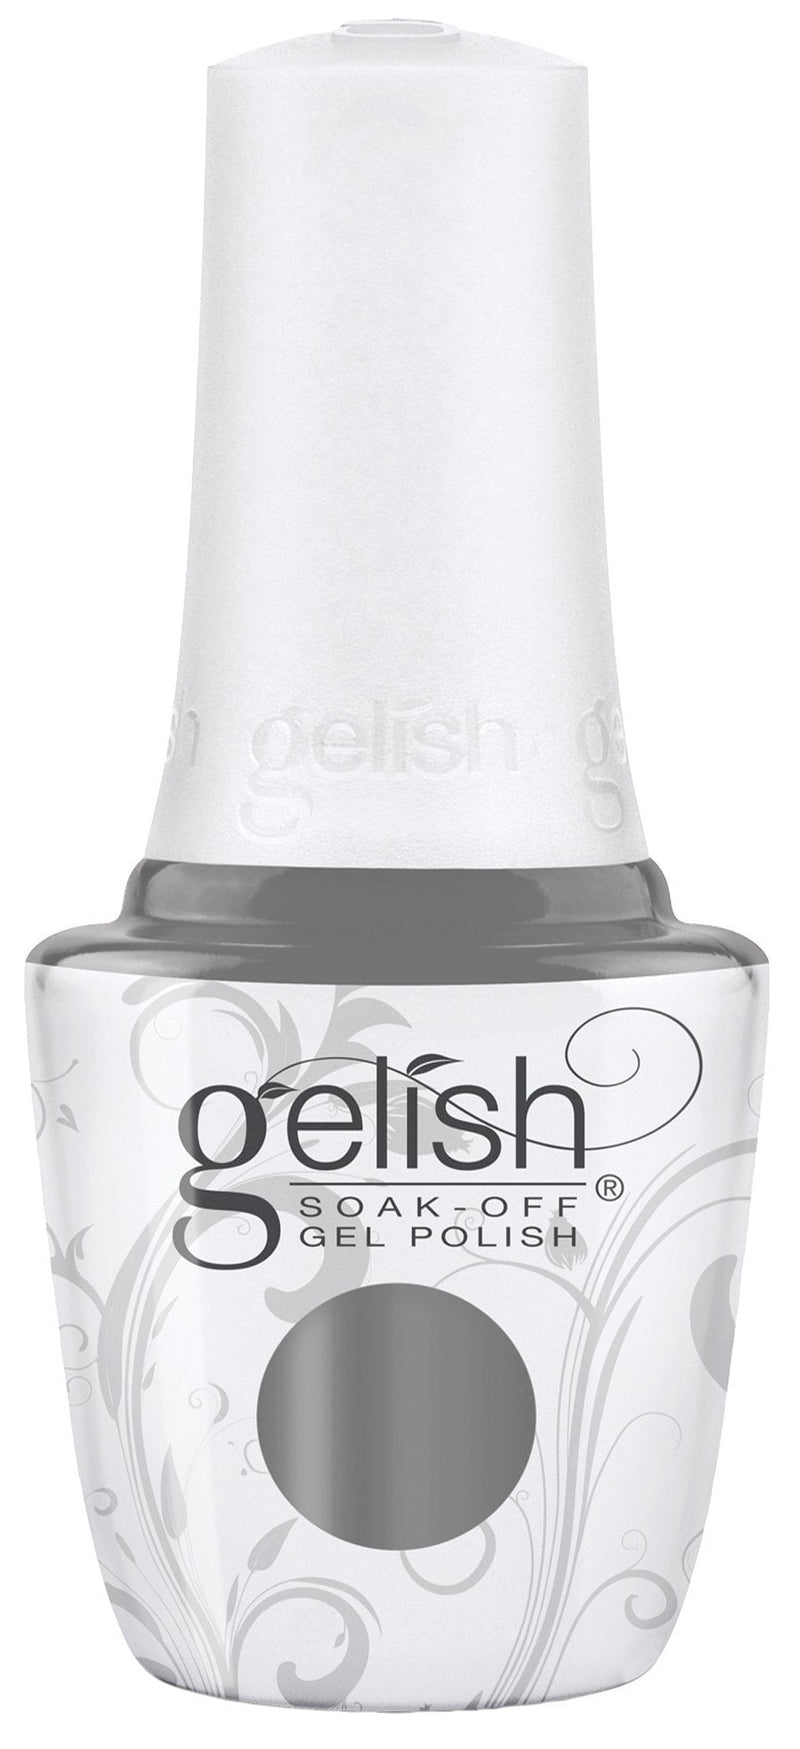 Let There Be Moonlight * Harmony Gelish